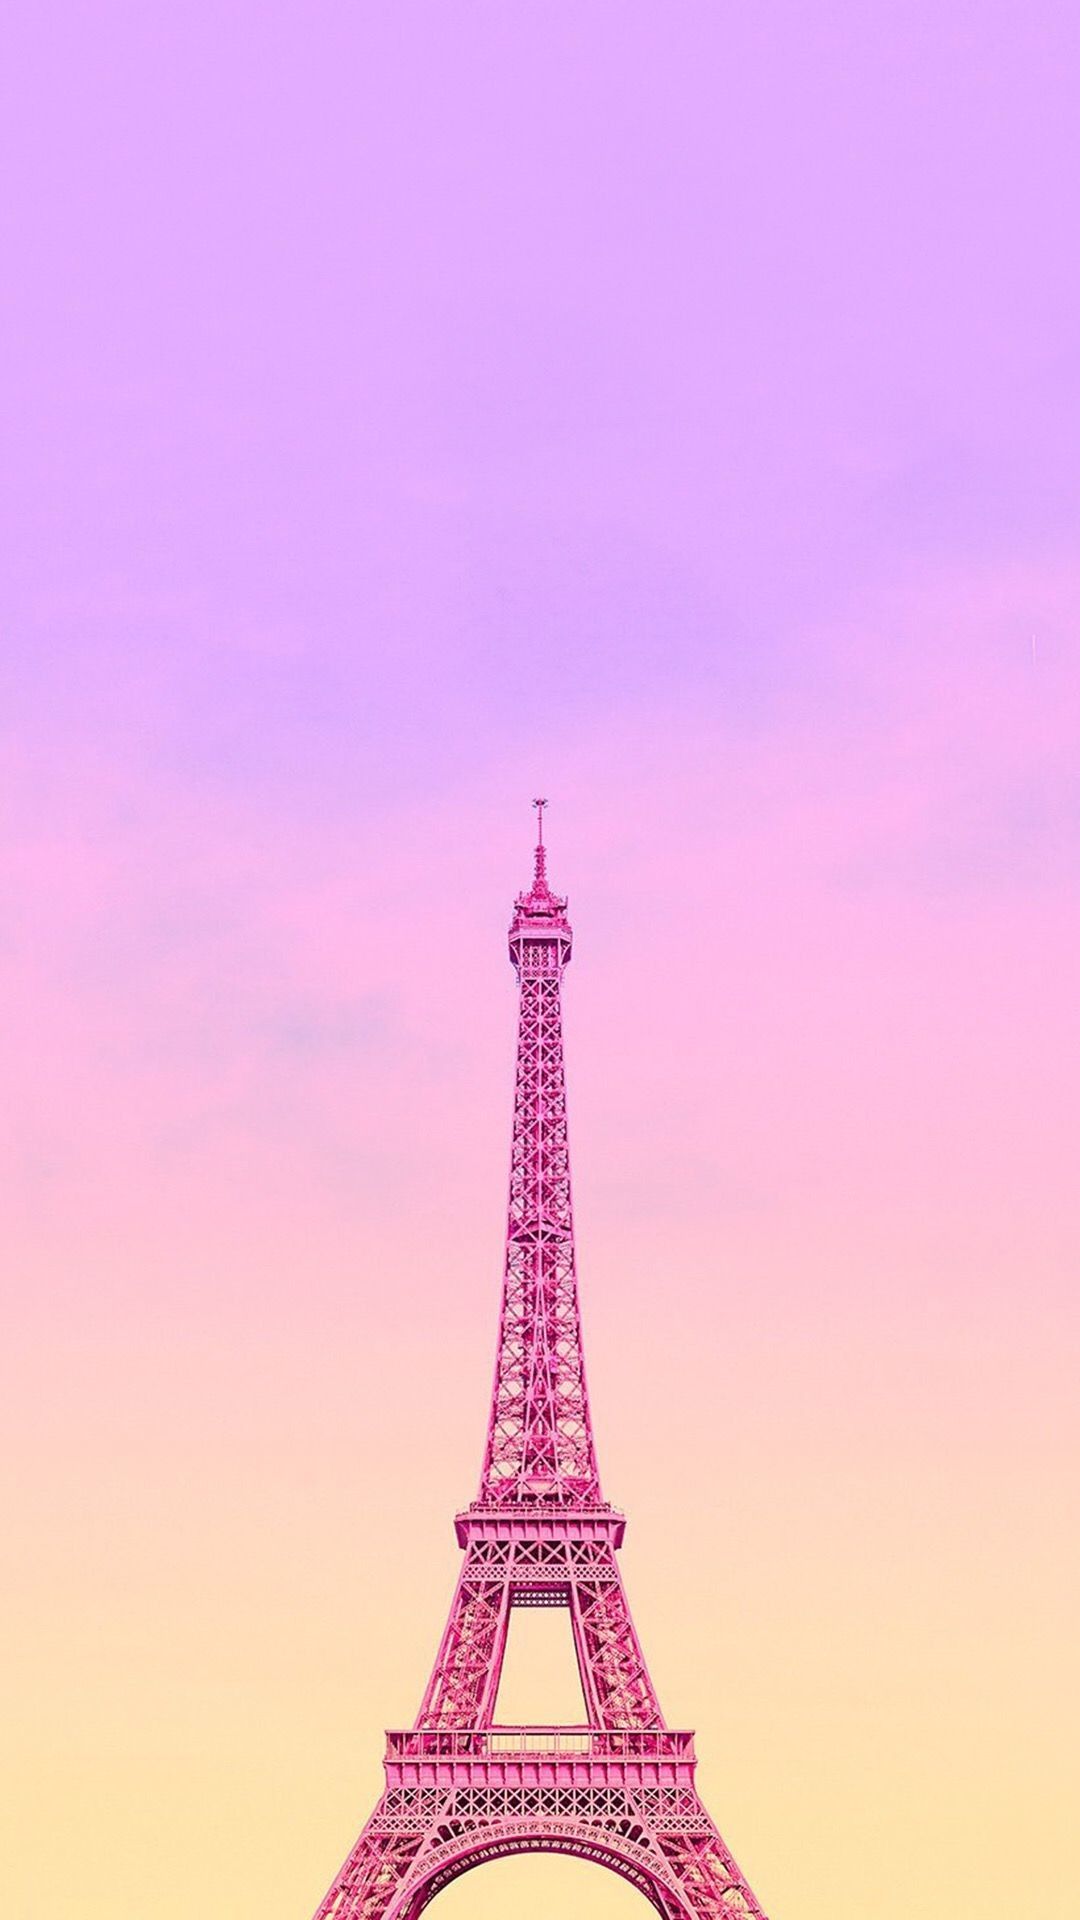 A pink eiffel tower is shown in the sky - Paris